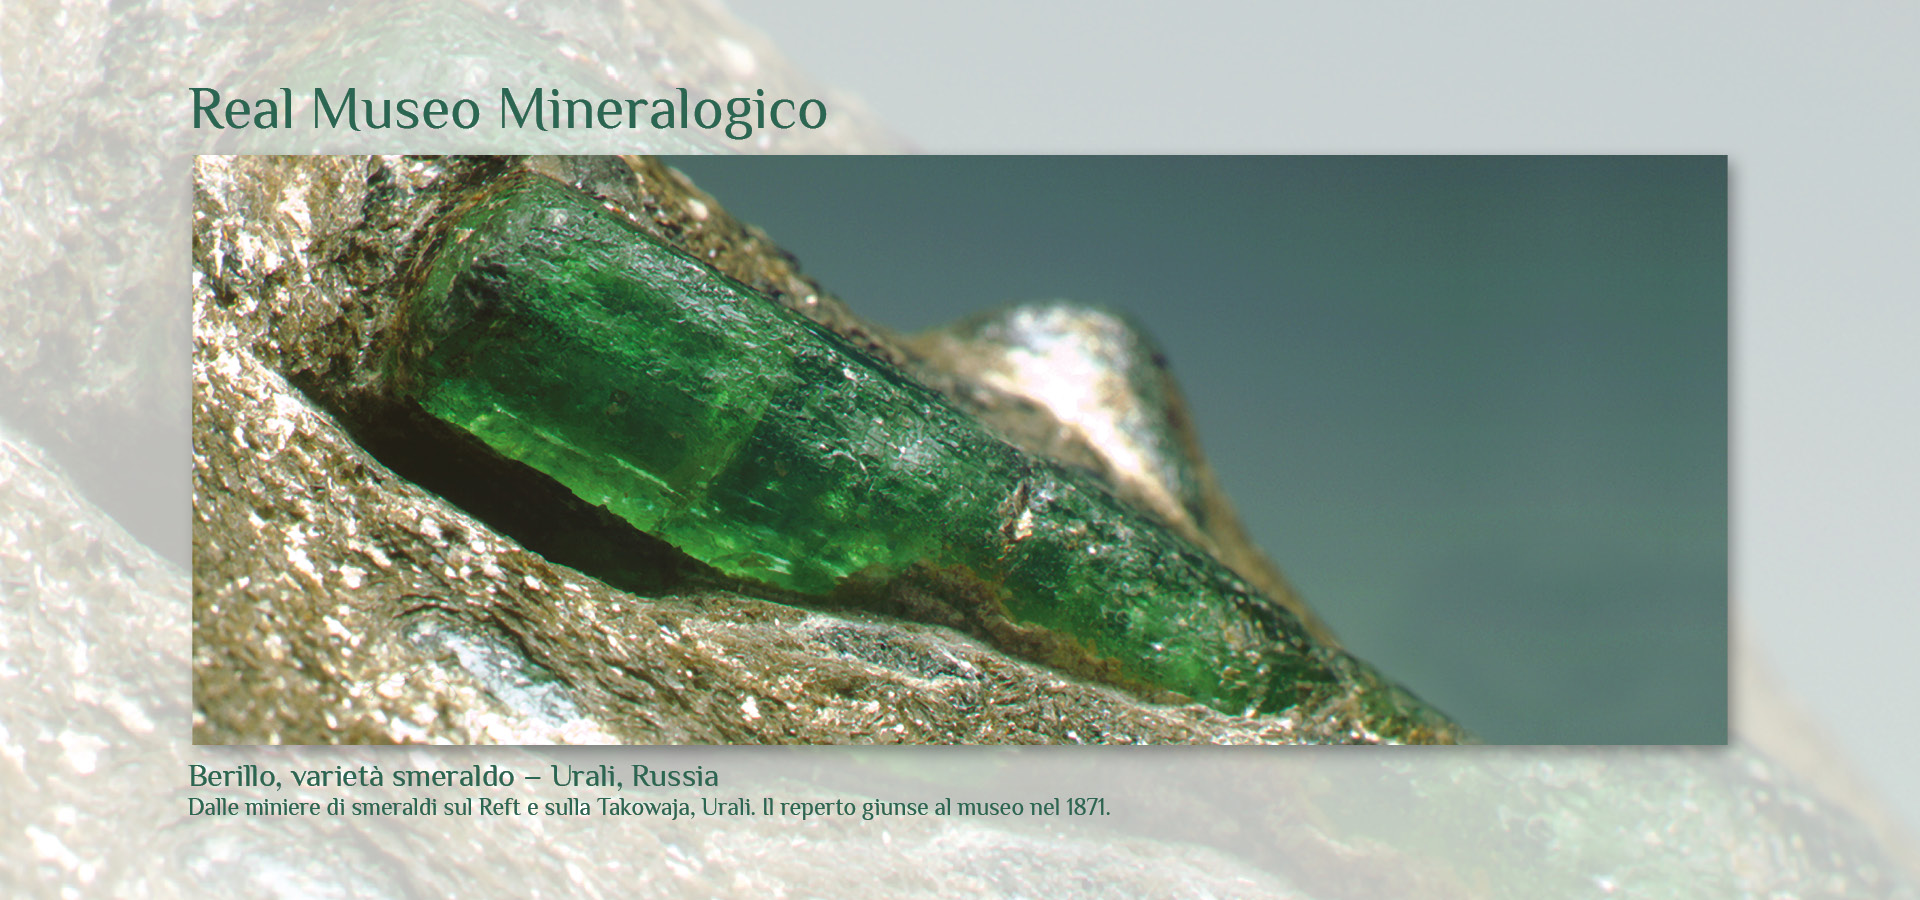 Real Museo Mineralogico